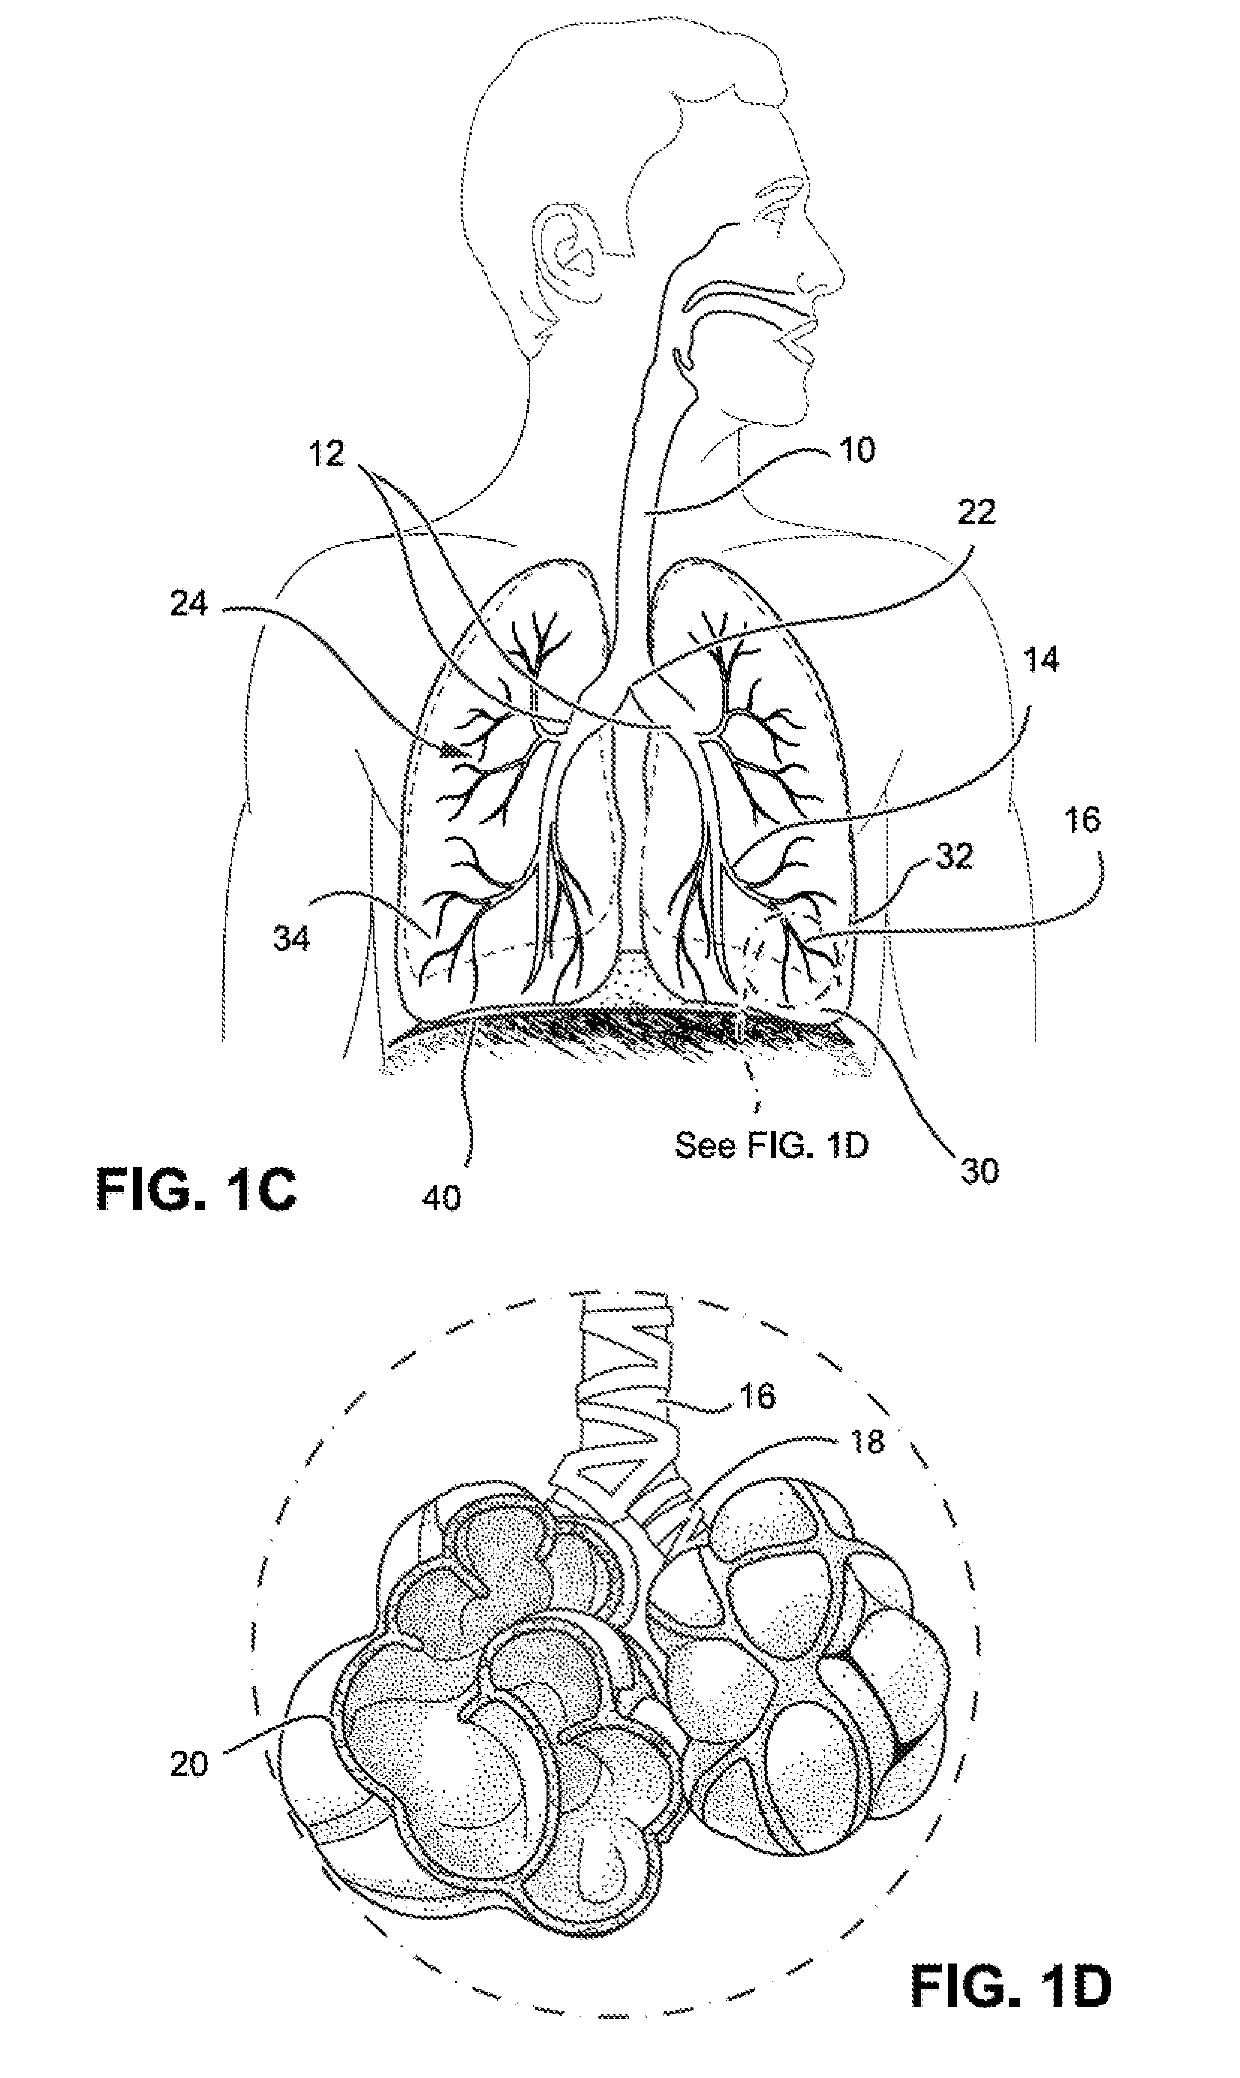 Methods and devices for the treatment of pulmonary disorders